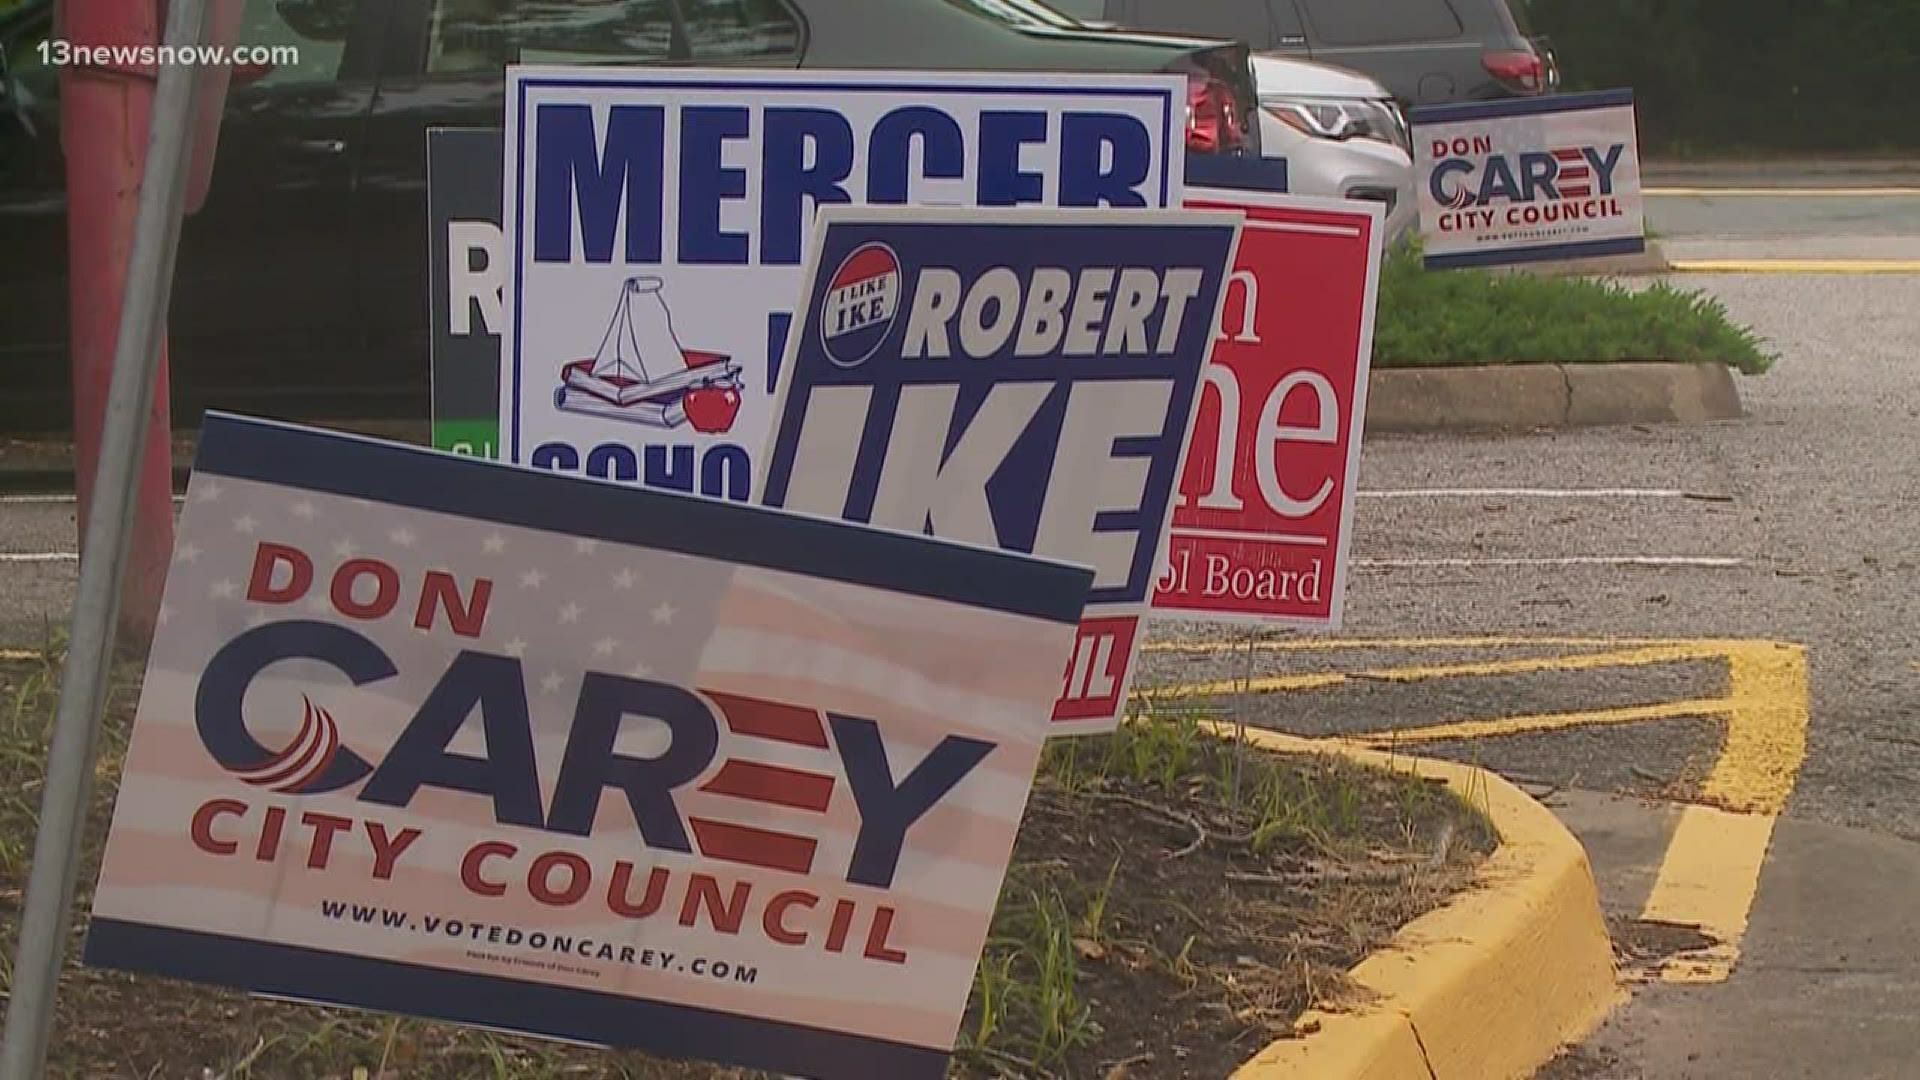 Voters will decide who will fill a number of seats in cities and towns in the area. The offices include mayor, council members, and school board members.